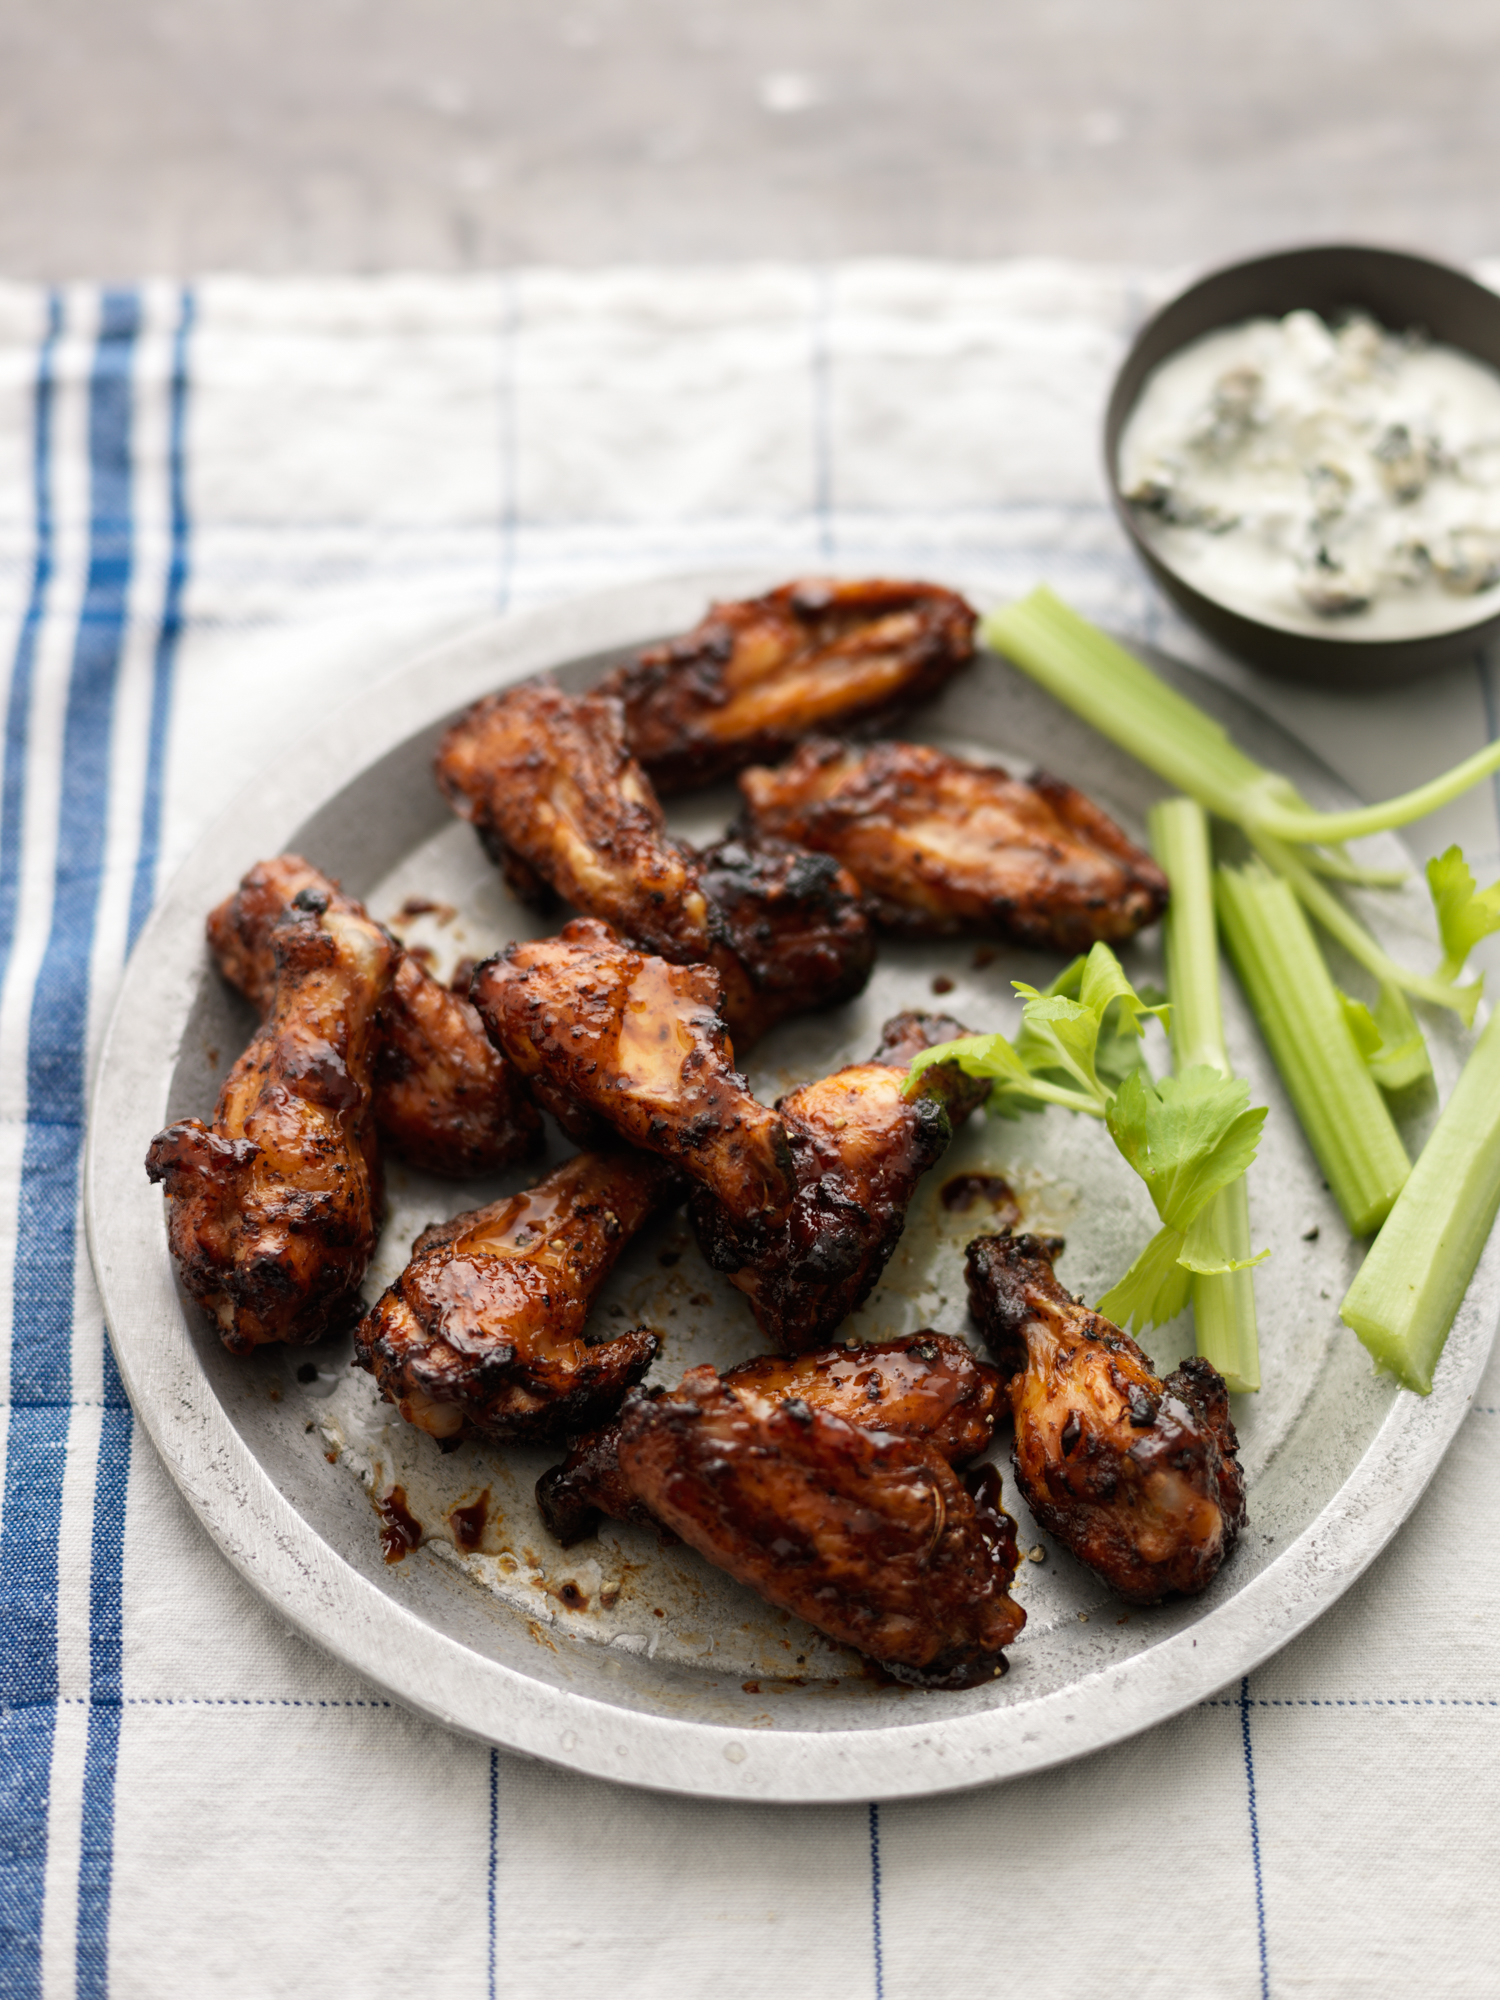 Buffalo Wings with Blue Cheese Dip - Justine Pattison